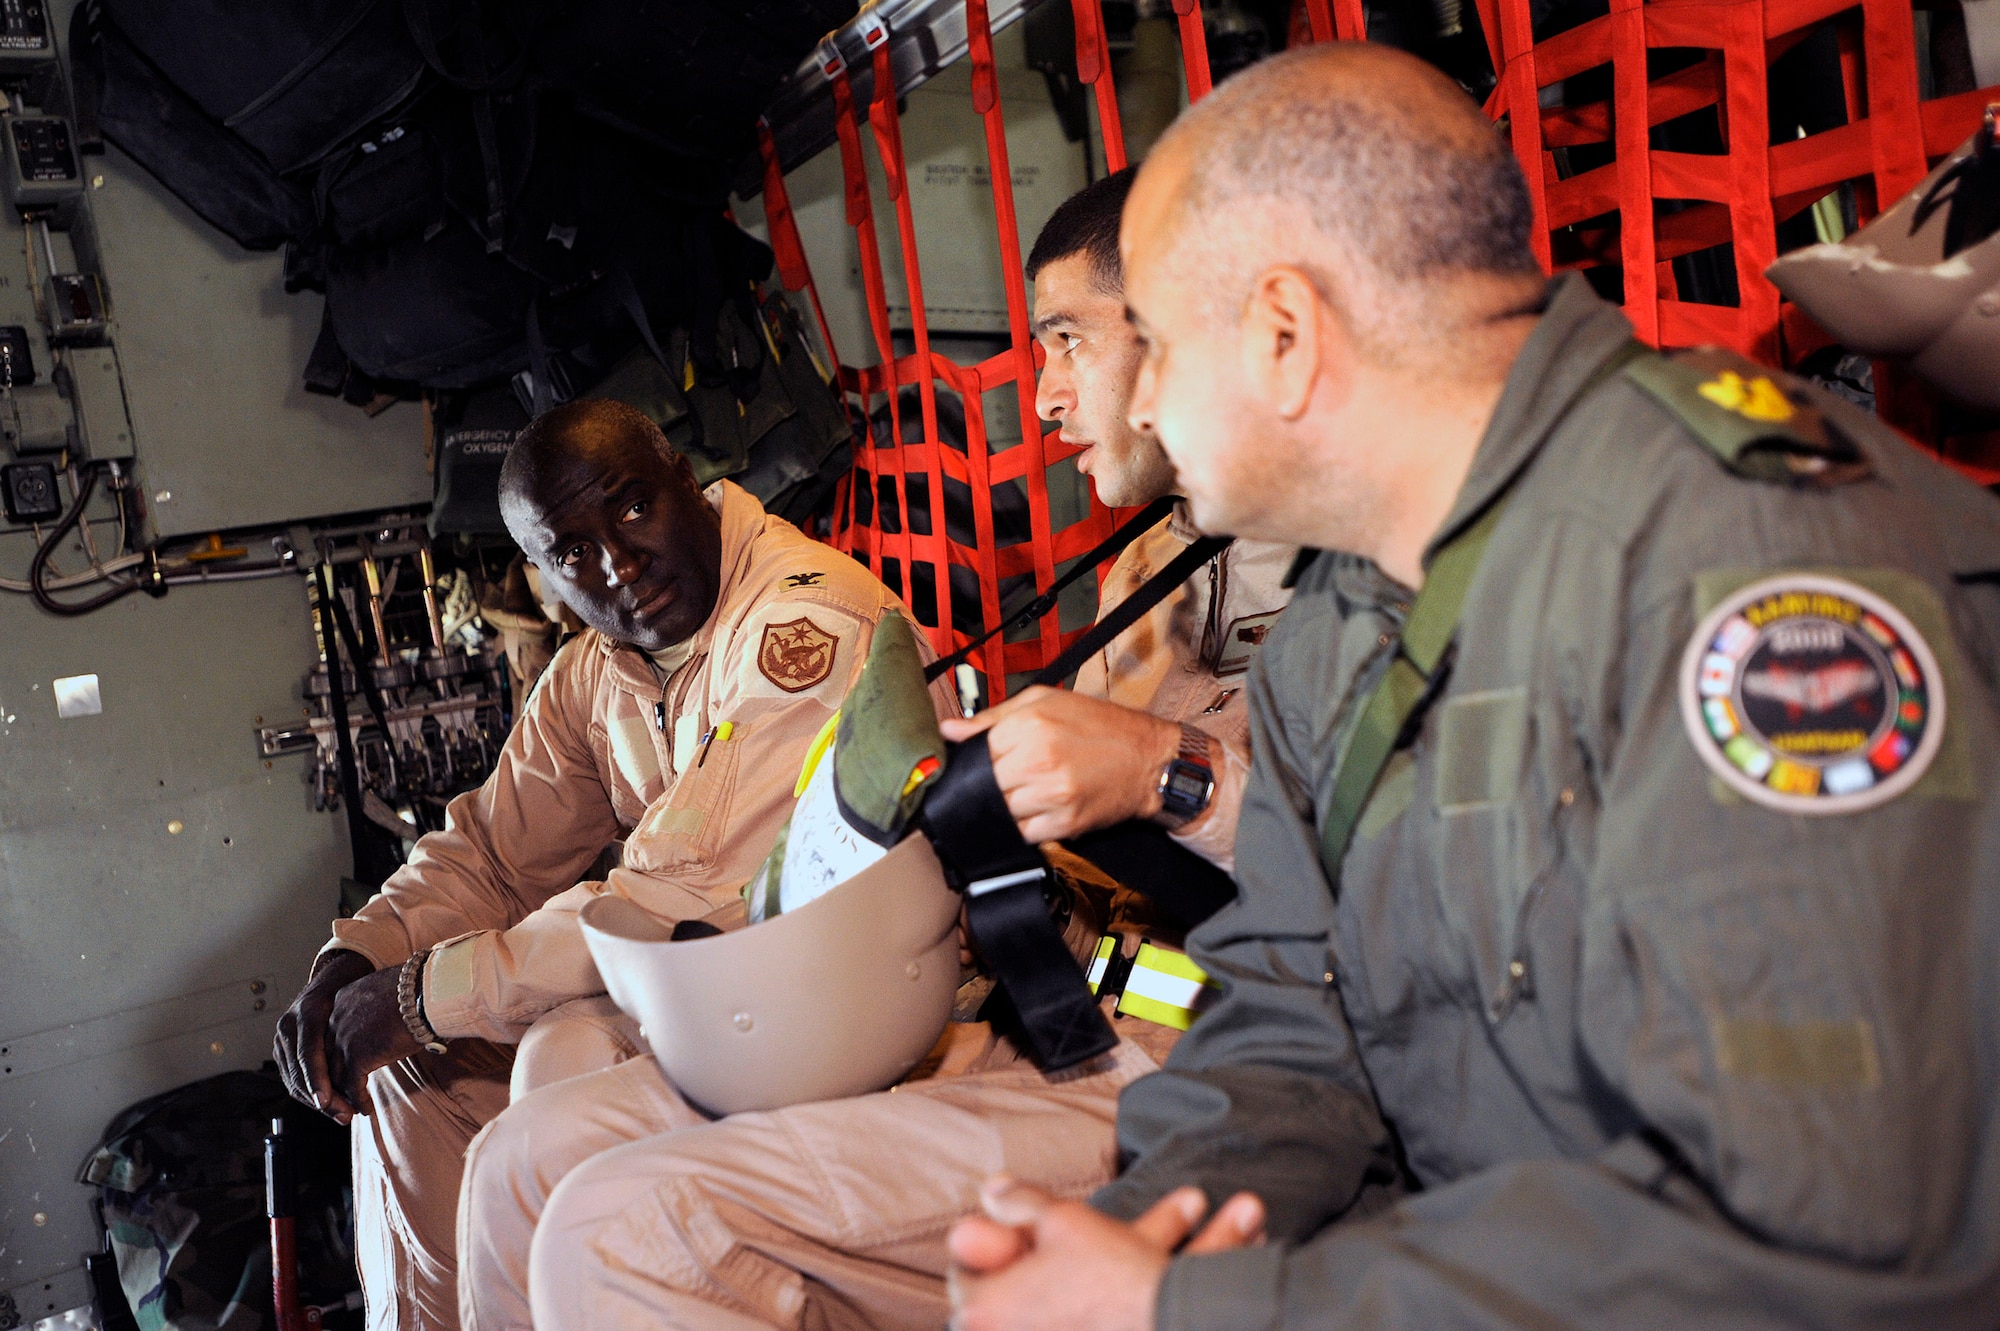 Col. (Dr.) Paul Young converses with Iraqi air force Capt. (Dr.) Mohammed and Iraqi air force Maj. (Dr.) Abdul-Razaq before departing on an aeromedical evacuation mission over Iraq Nov. 7. The two Iraqi doctors from Iraq's Ministry of Defense accompanied the Air Force mission to study aeromedical evacuation procedures so that they can establish an aeromedical evacuation service for the Iraqi air force. Doctor Young, the surgeon general for the Coalition Air Forces Transition Team, is deployed from Ramstein Air Base, Germany. (U.S. Air Force photo/Airman 1st Class Jason Epley)